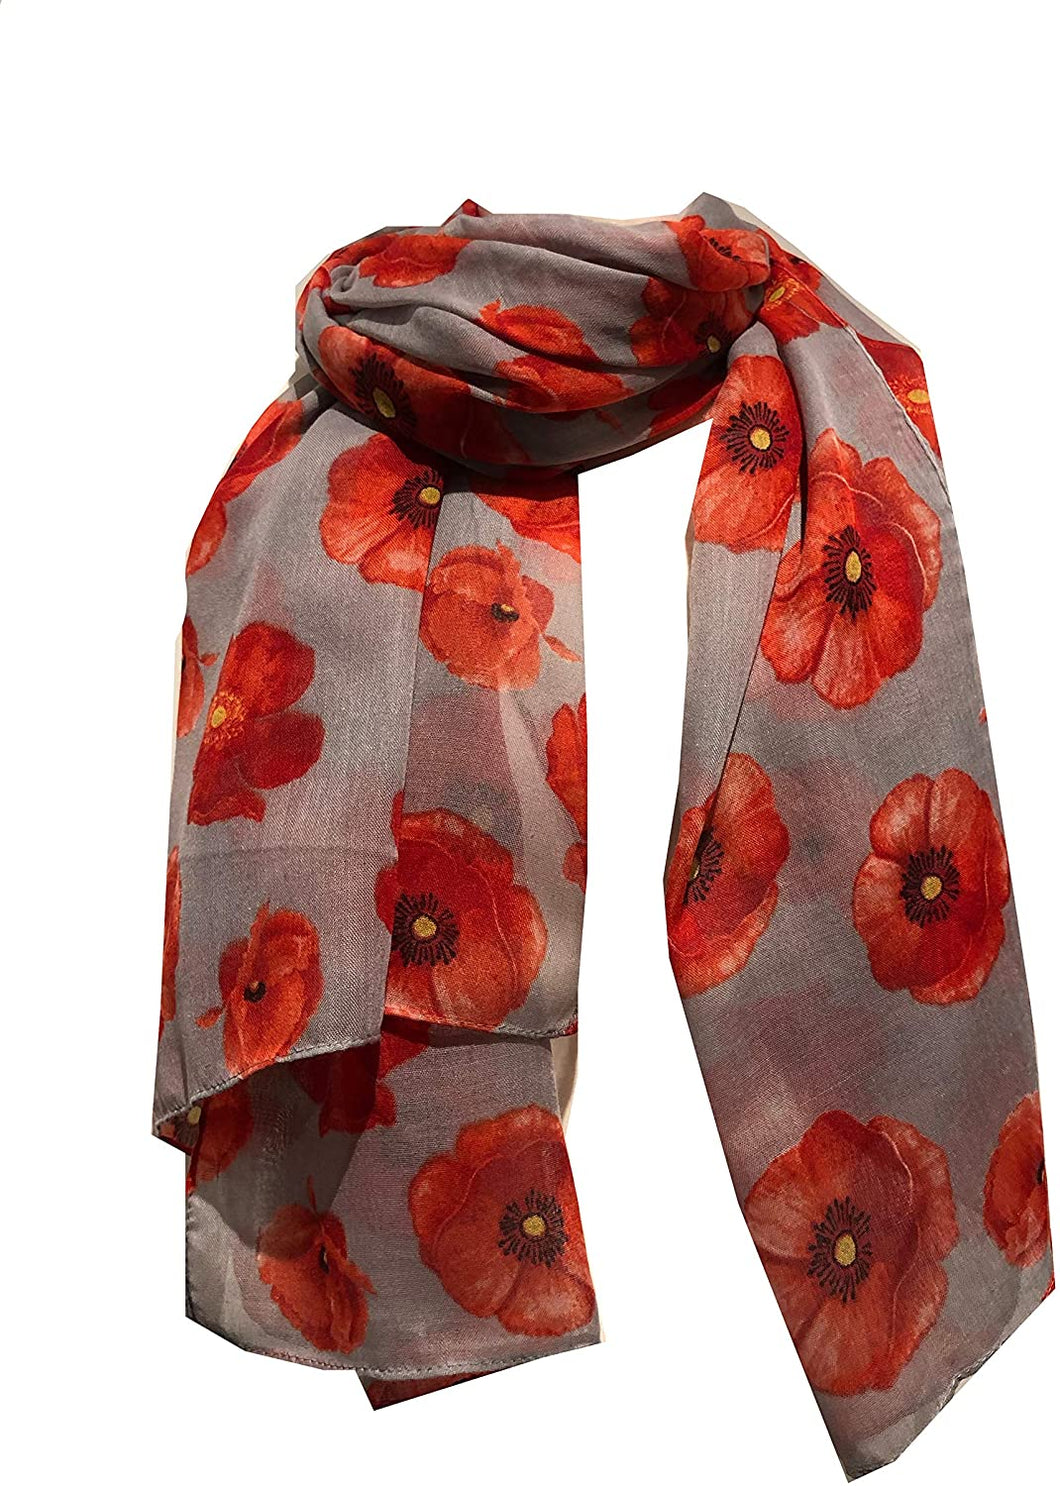 Pamper Yourself Now Bluey Grey Poppy Design Long Scarf, Great for Presents/Gifts.